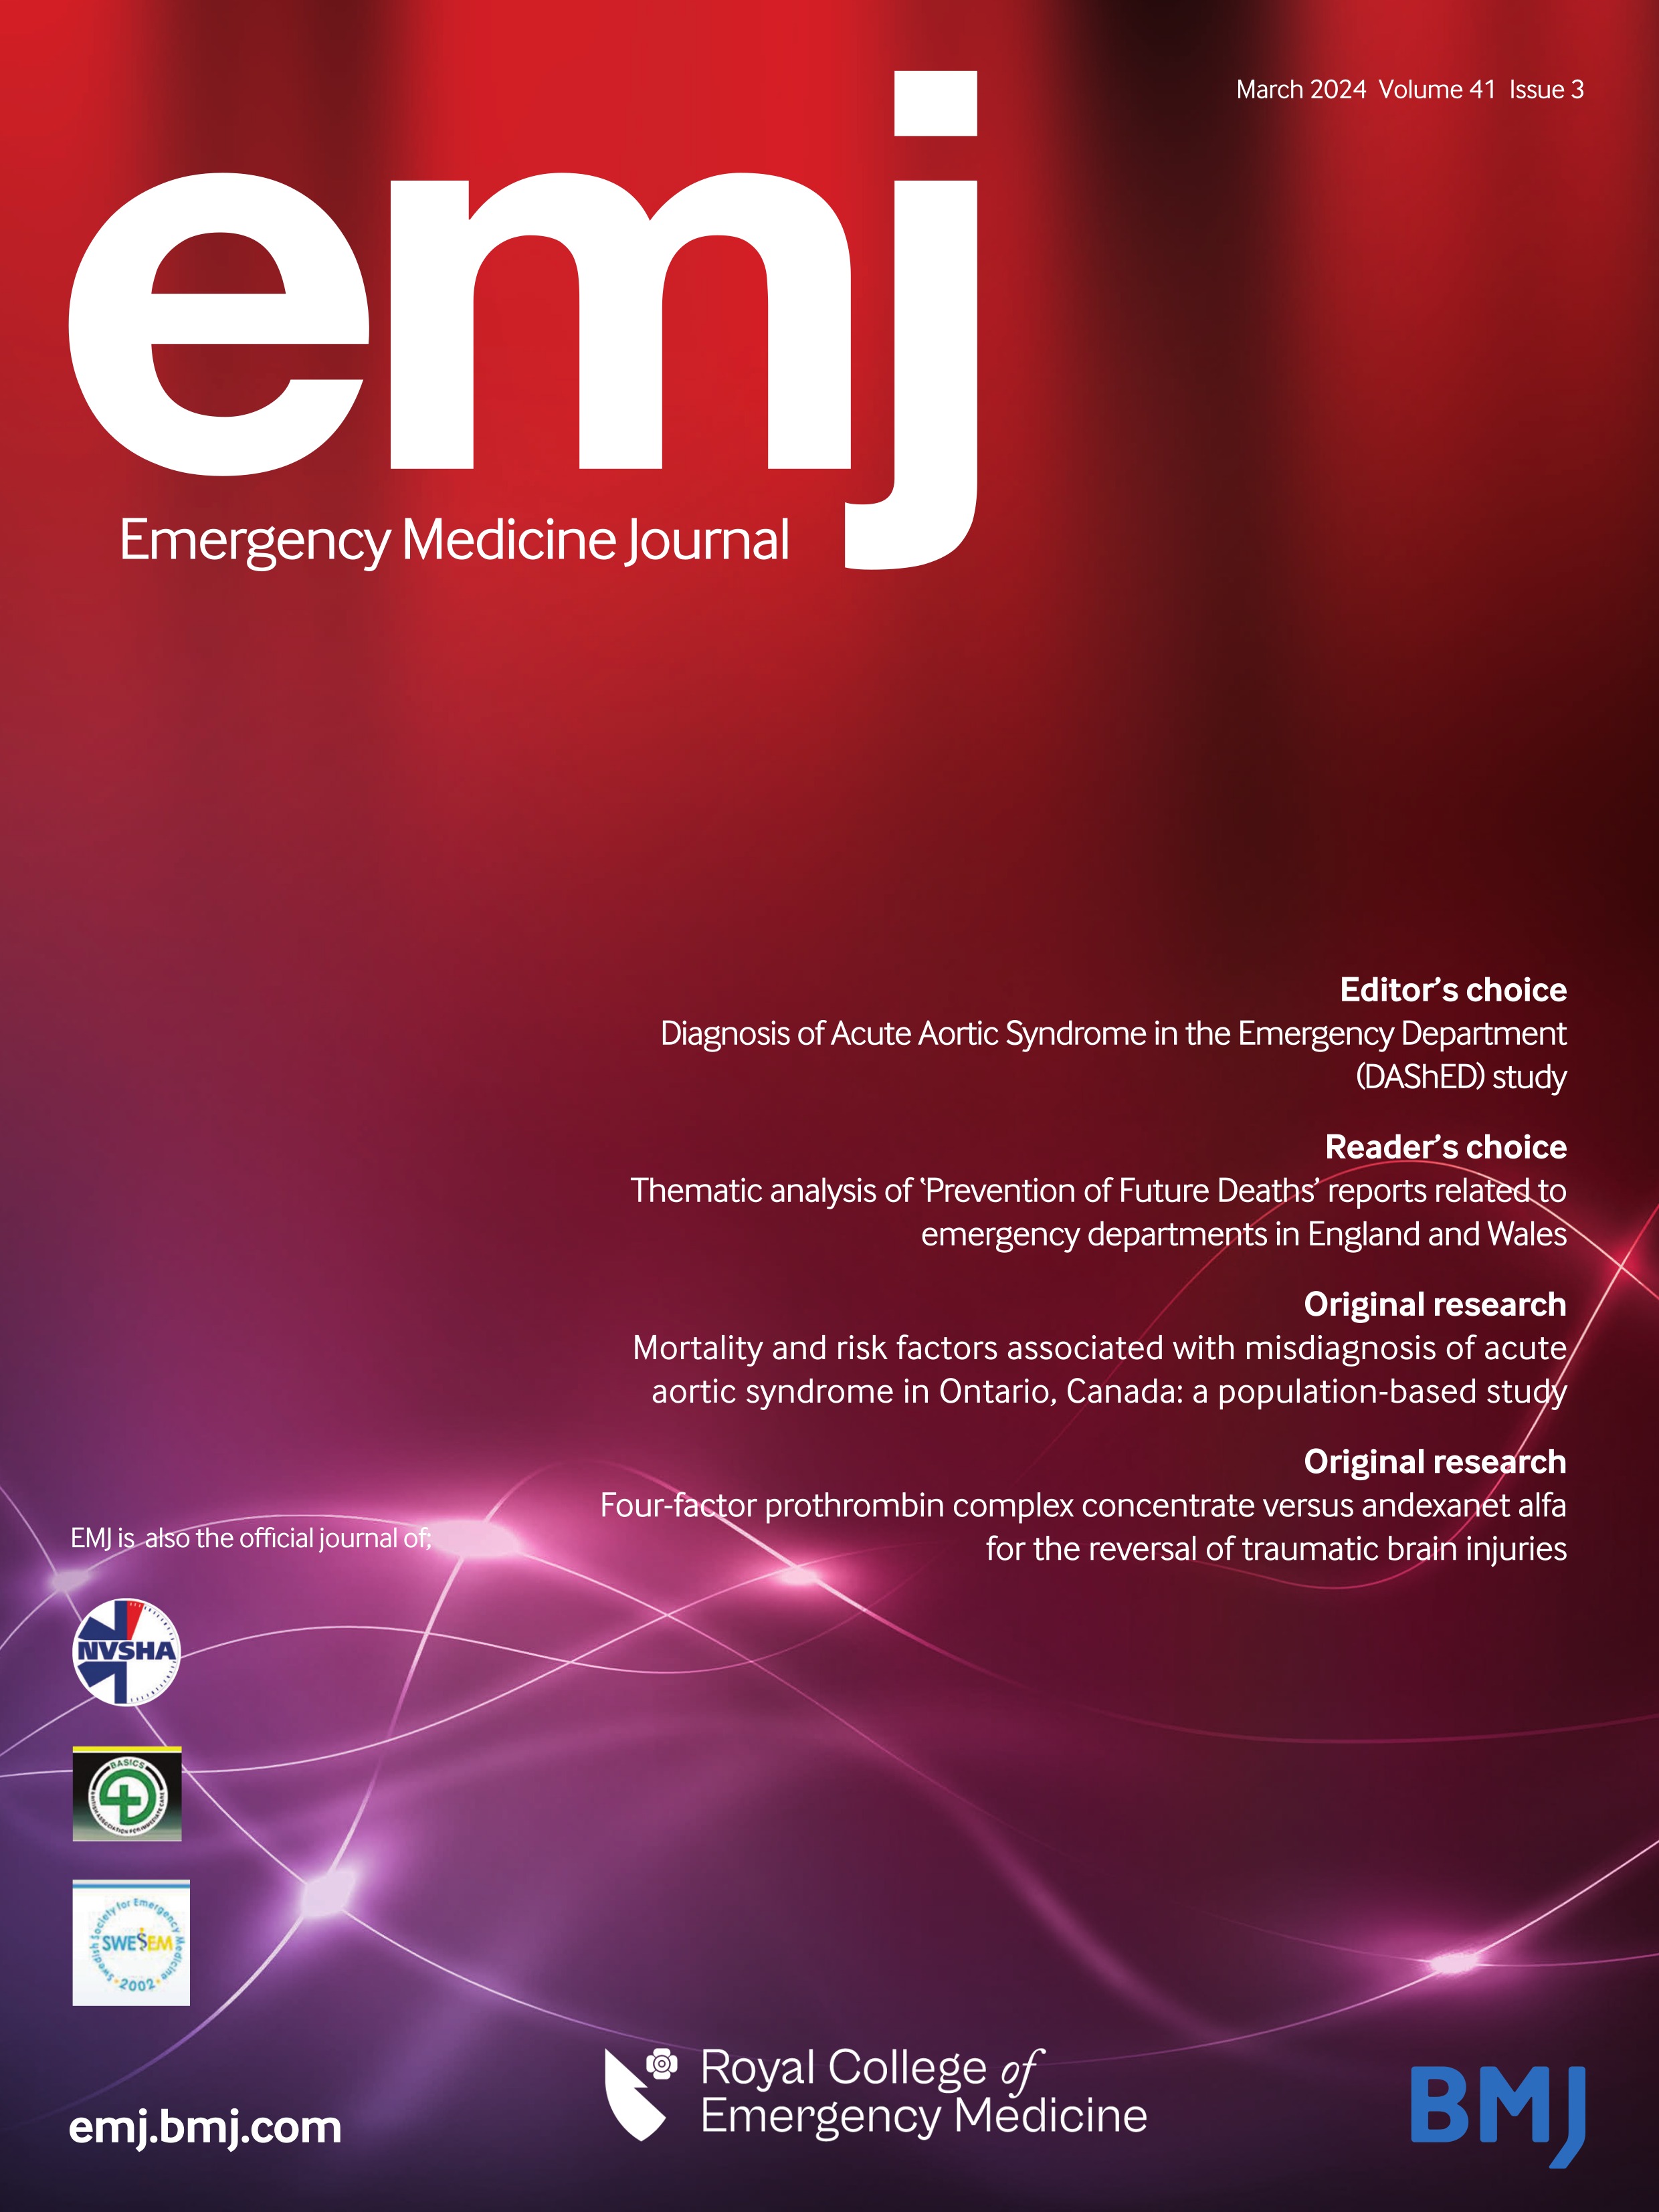 Comparison of diuretics and fluid expansion in the initial treatment of patients with normotensive acute pulmonary embolism: a systematic review and meta-analysis